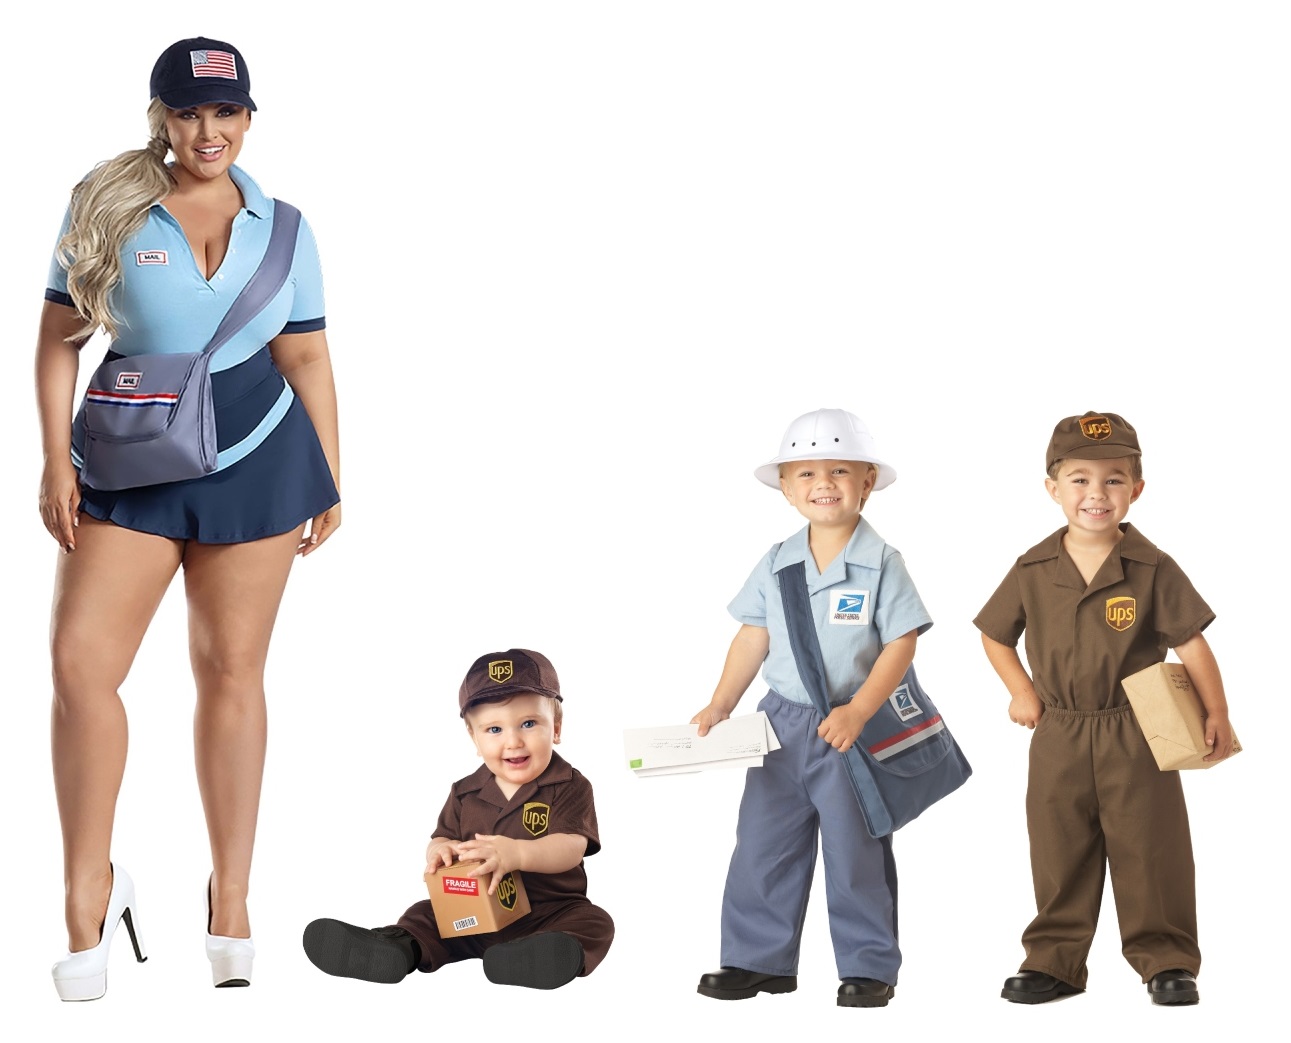 Post Office and UPS Costumes